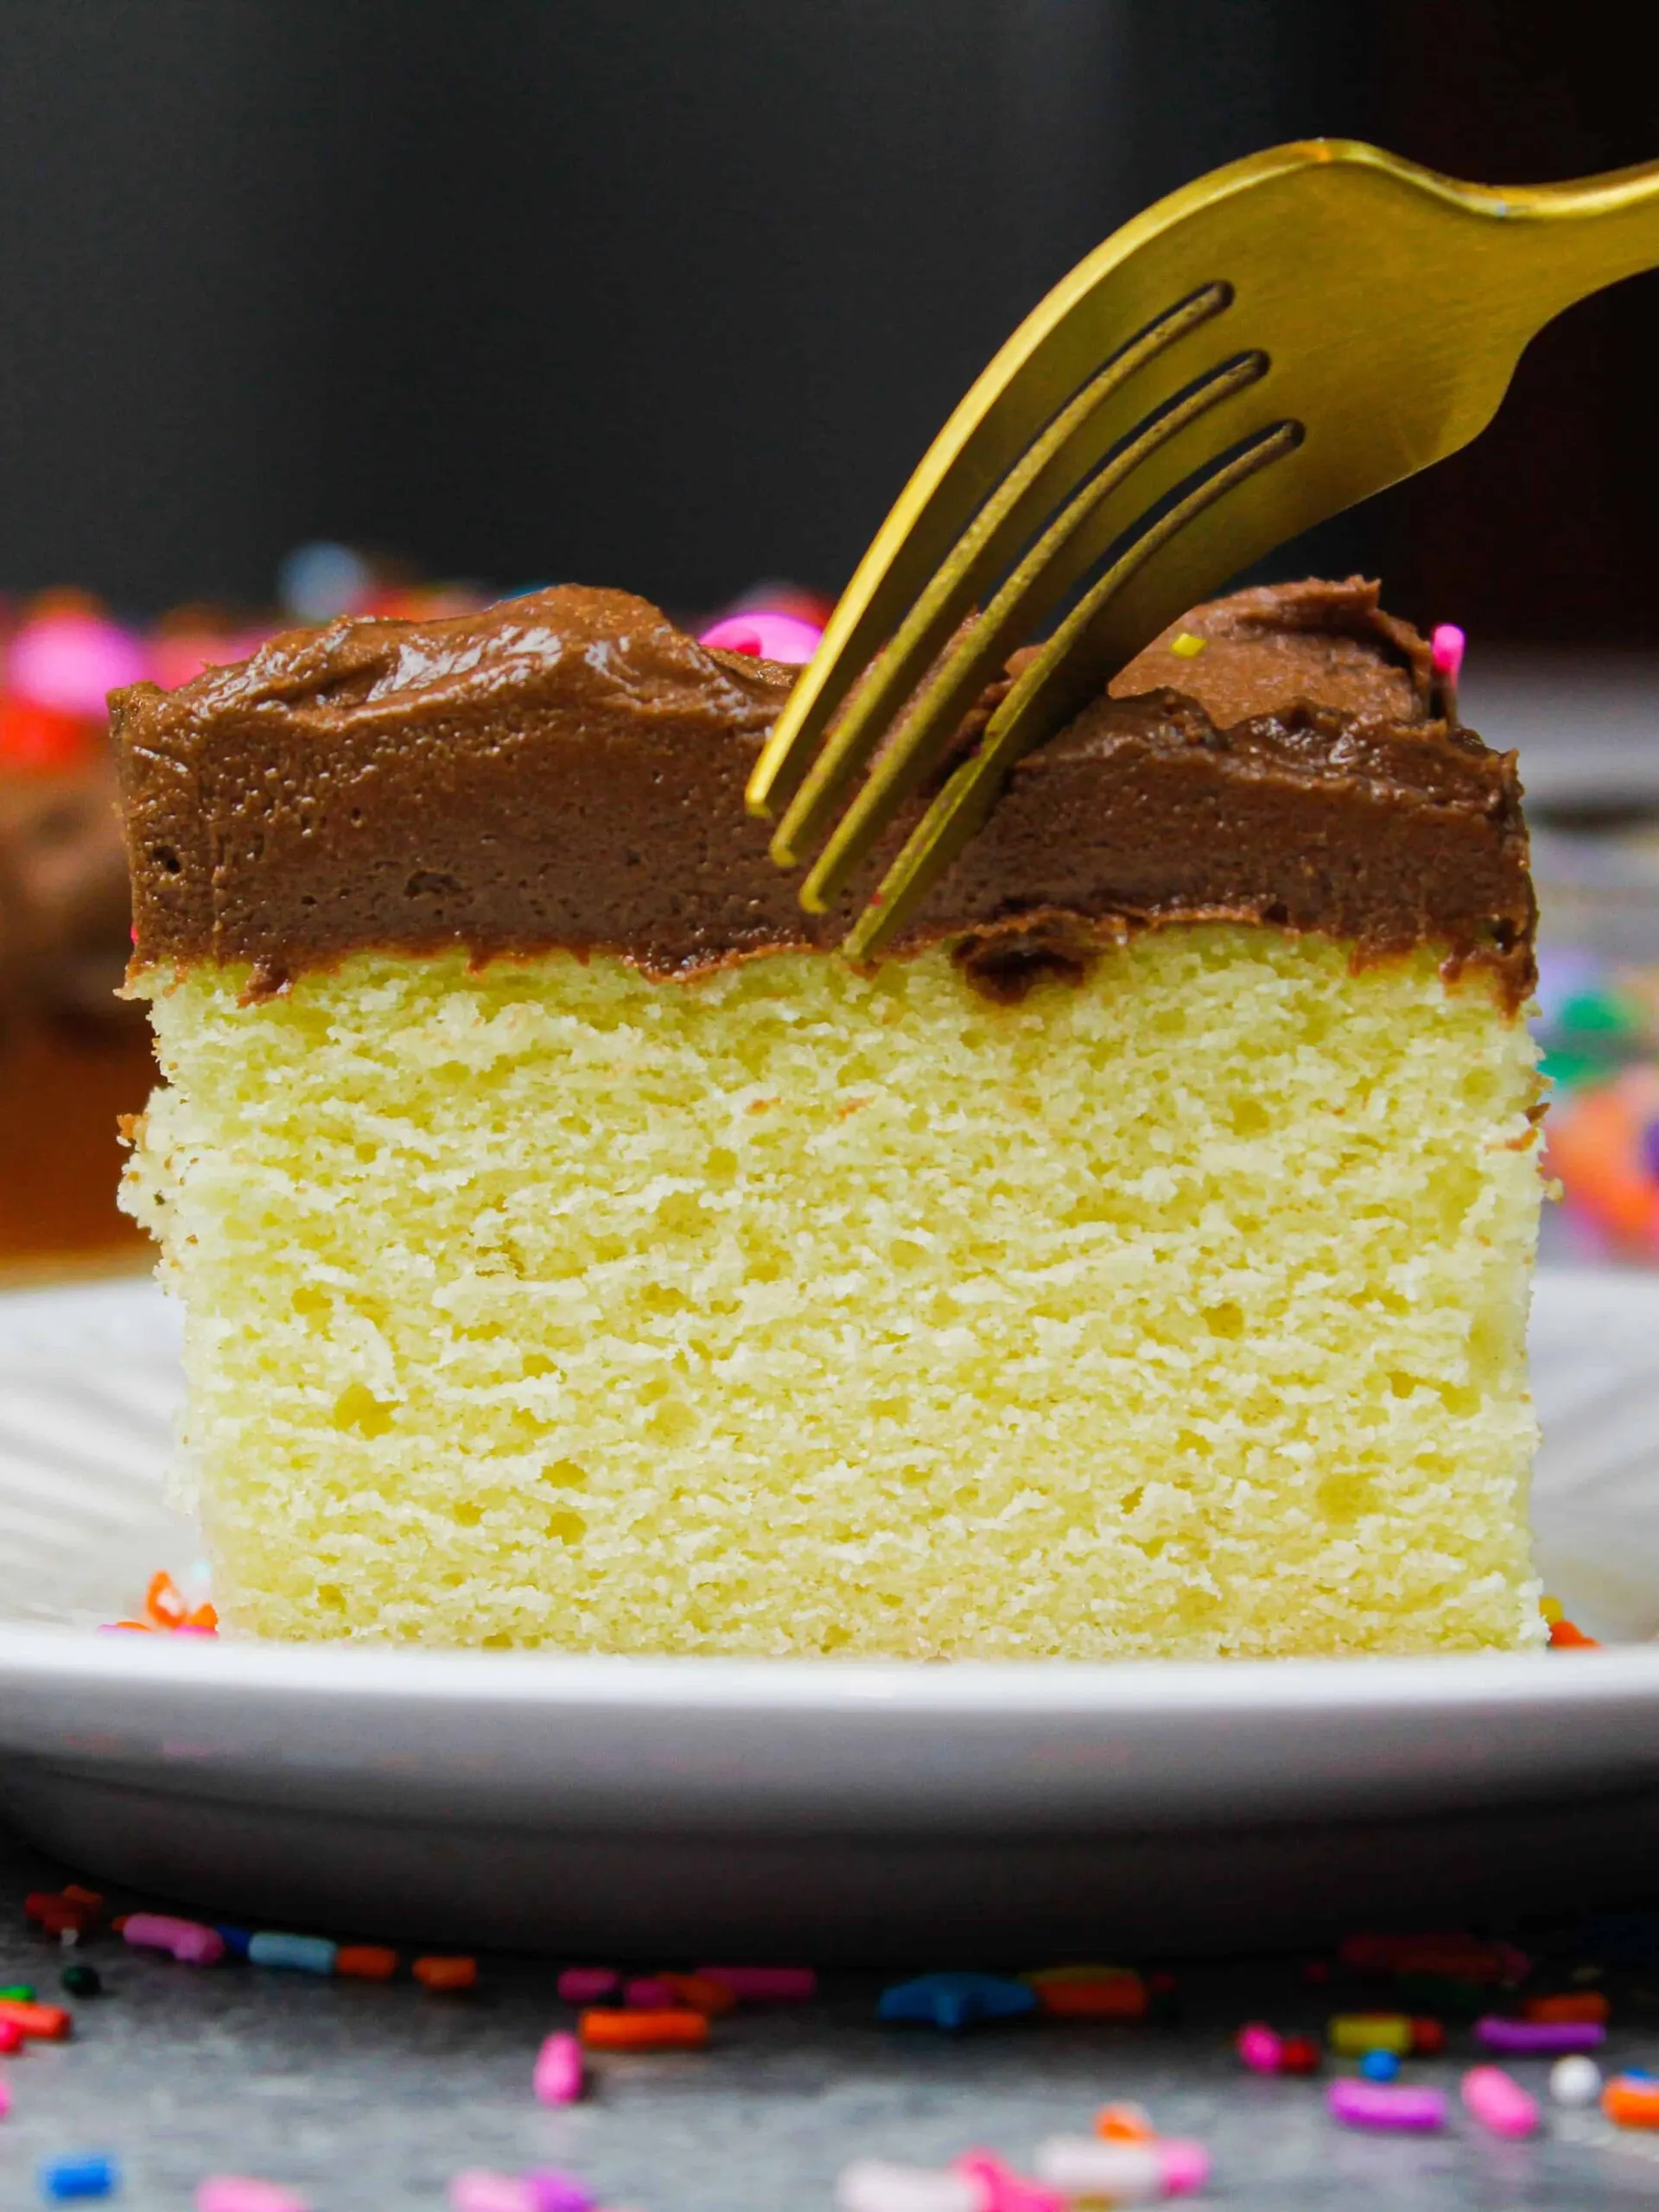 image of slice of yellow sheet cake, with tender and moist texture